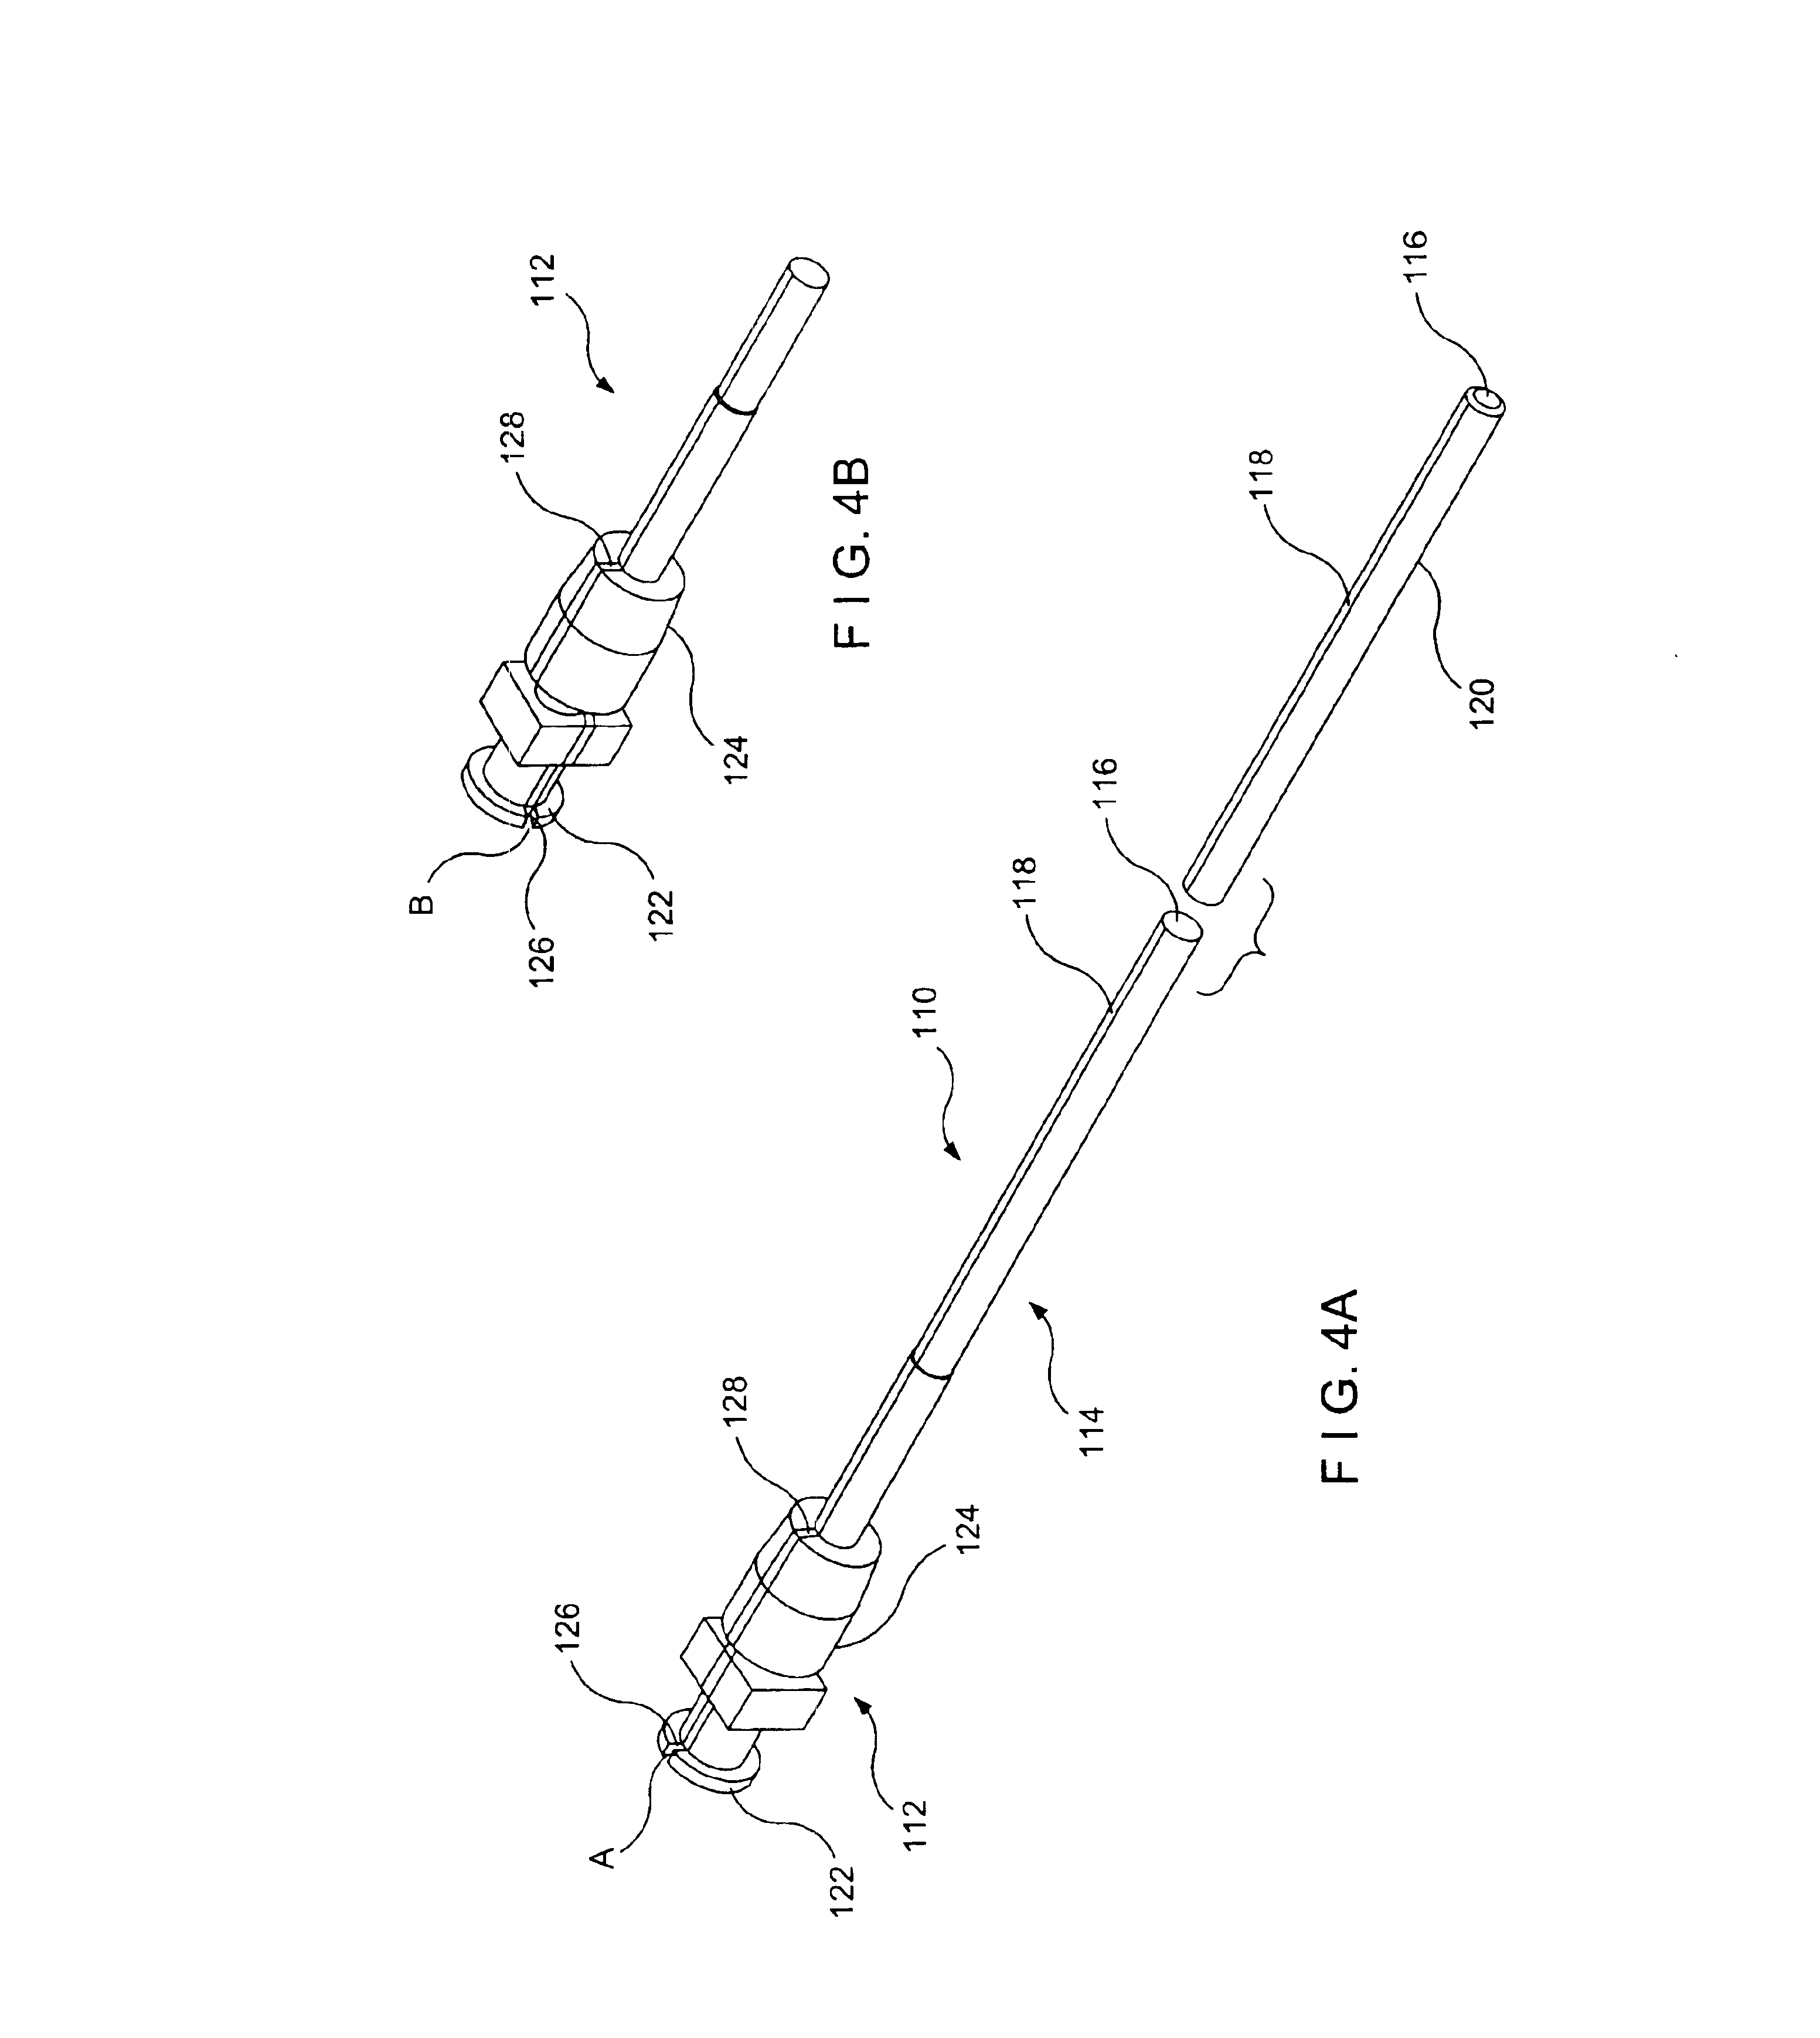 Guidewire locking device and method